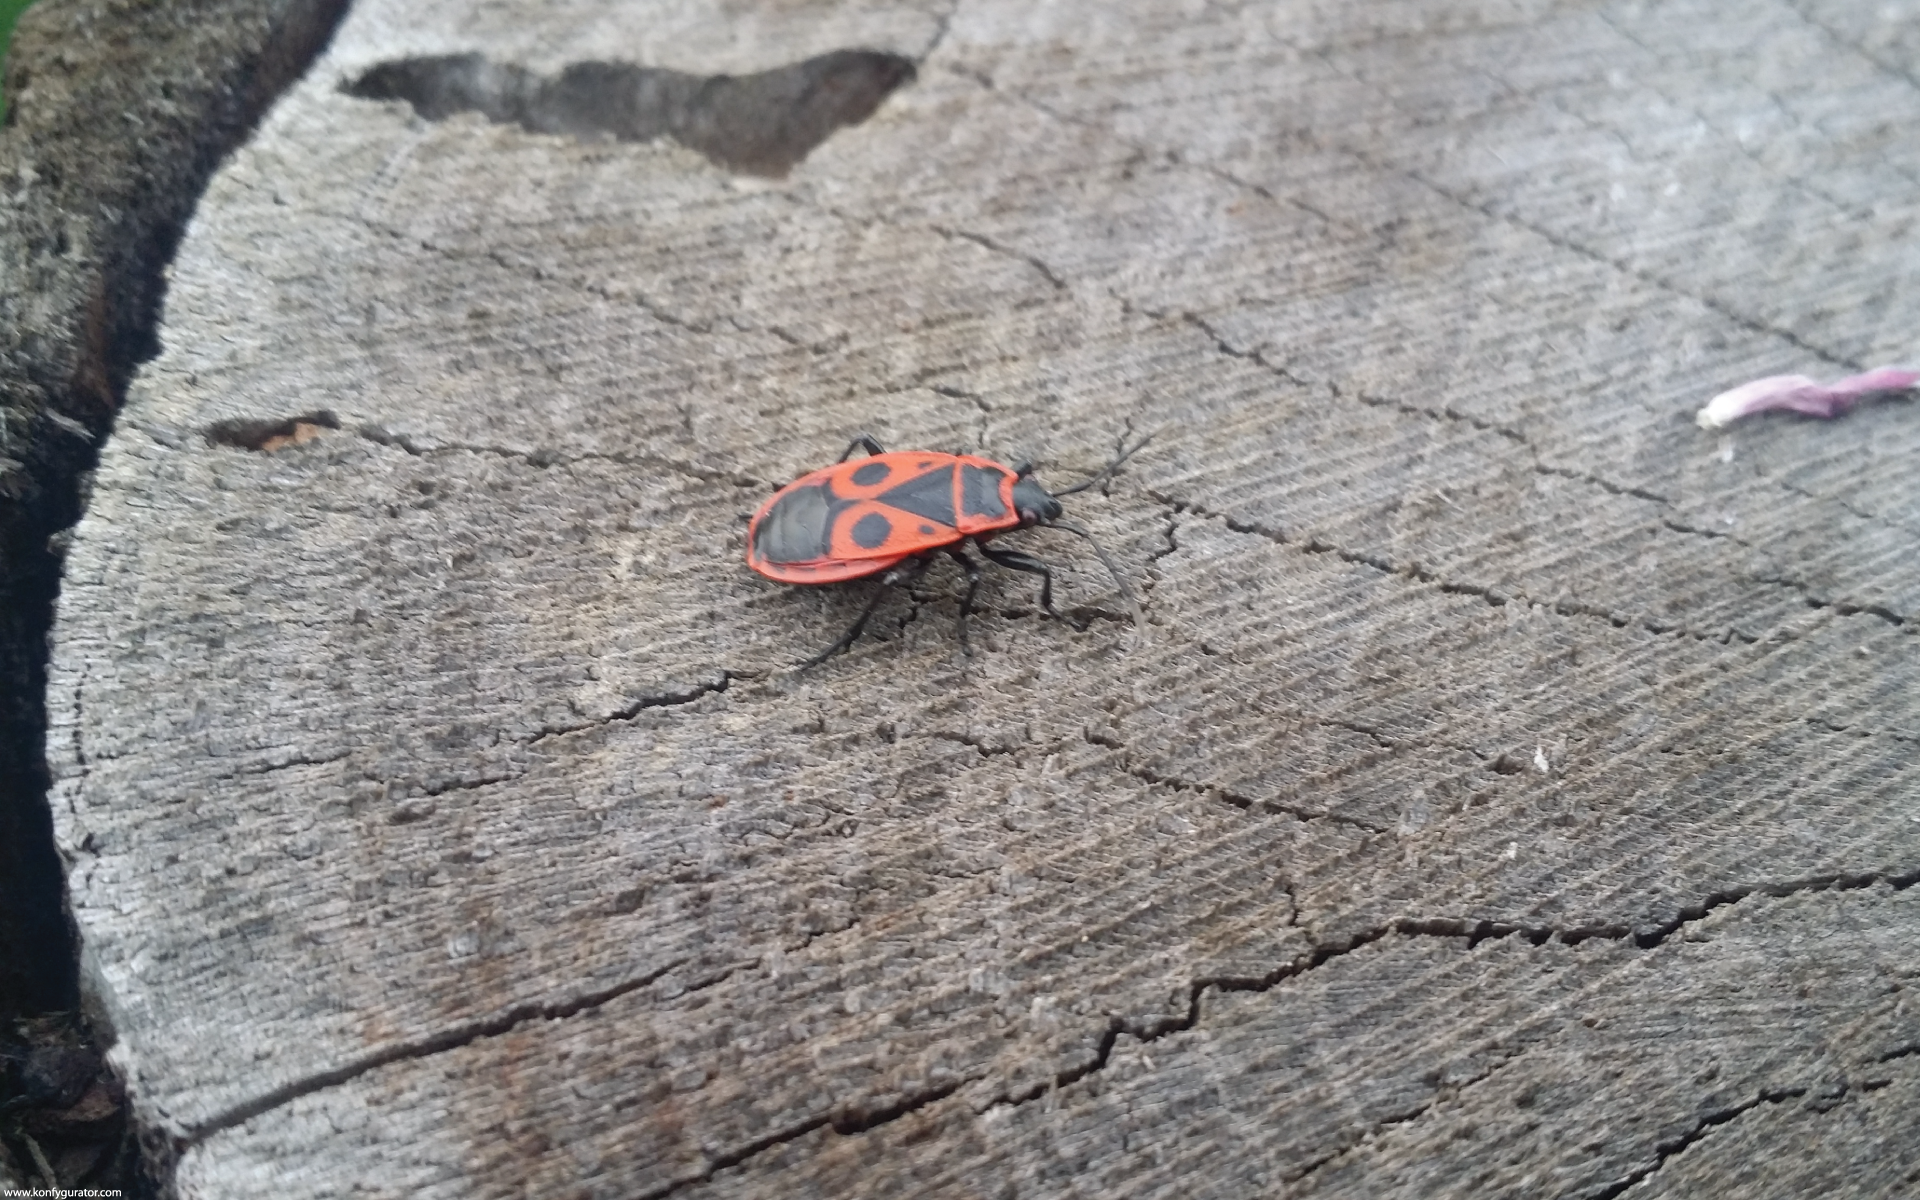 HD Wallpapers - Nature - stump, bug, red